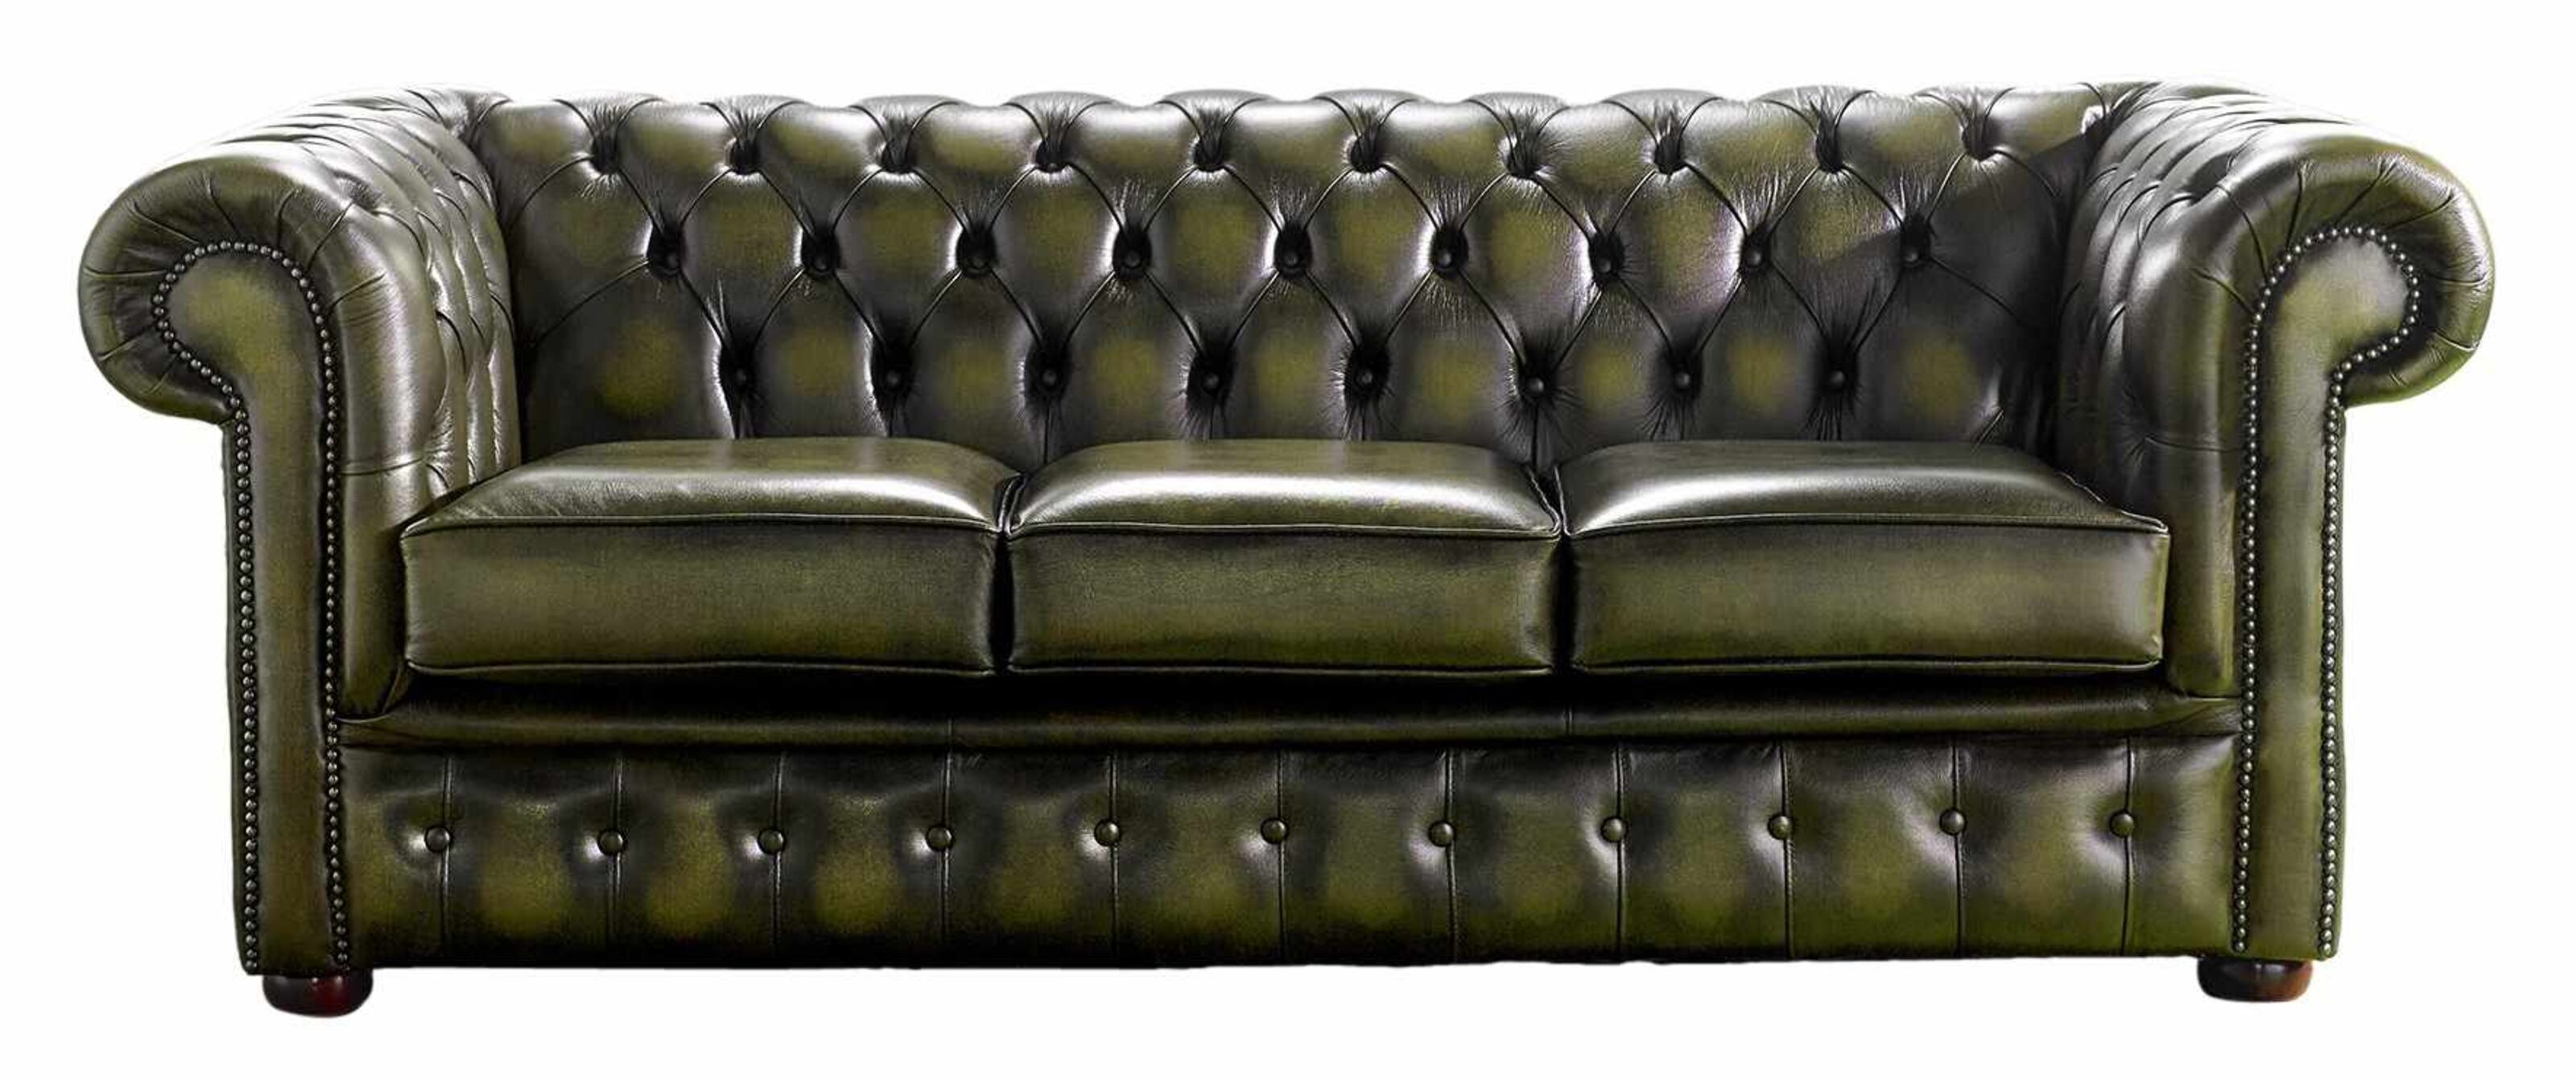 Elevating Elegance Incorporating a Chesterfield Sofa into Your Living Room Décor  %Post Title